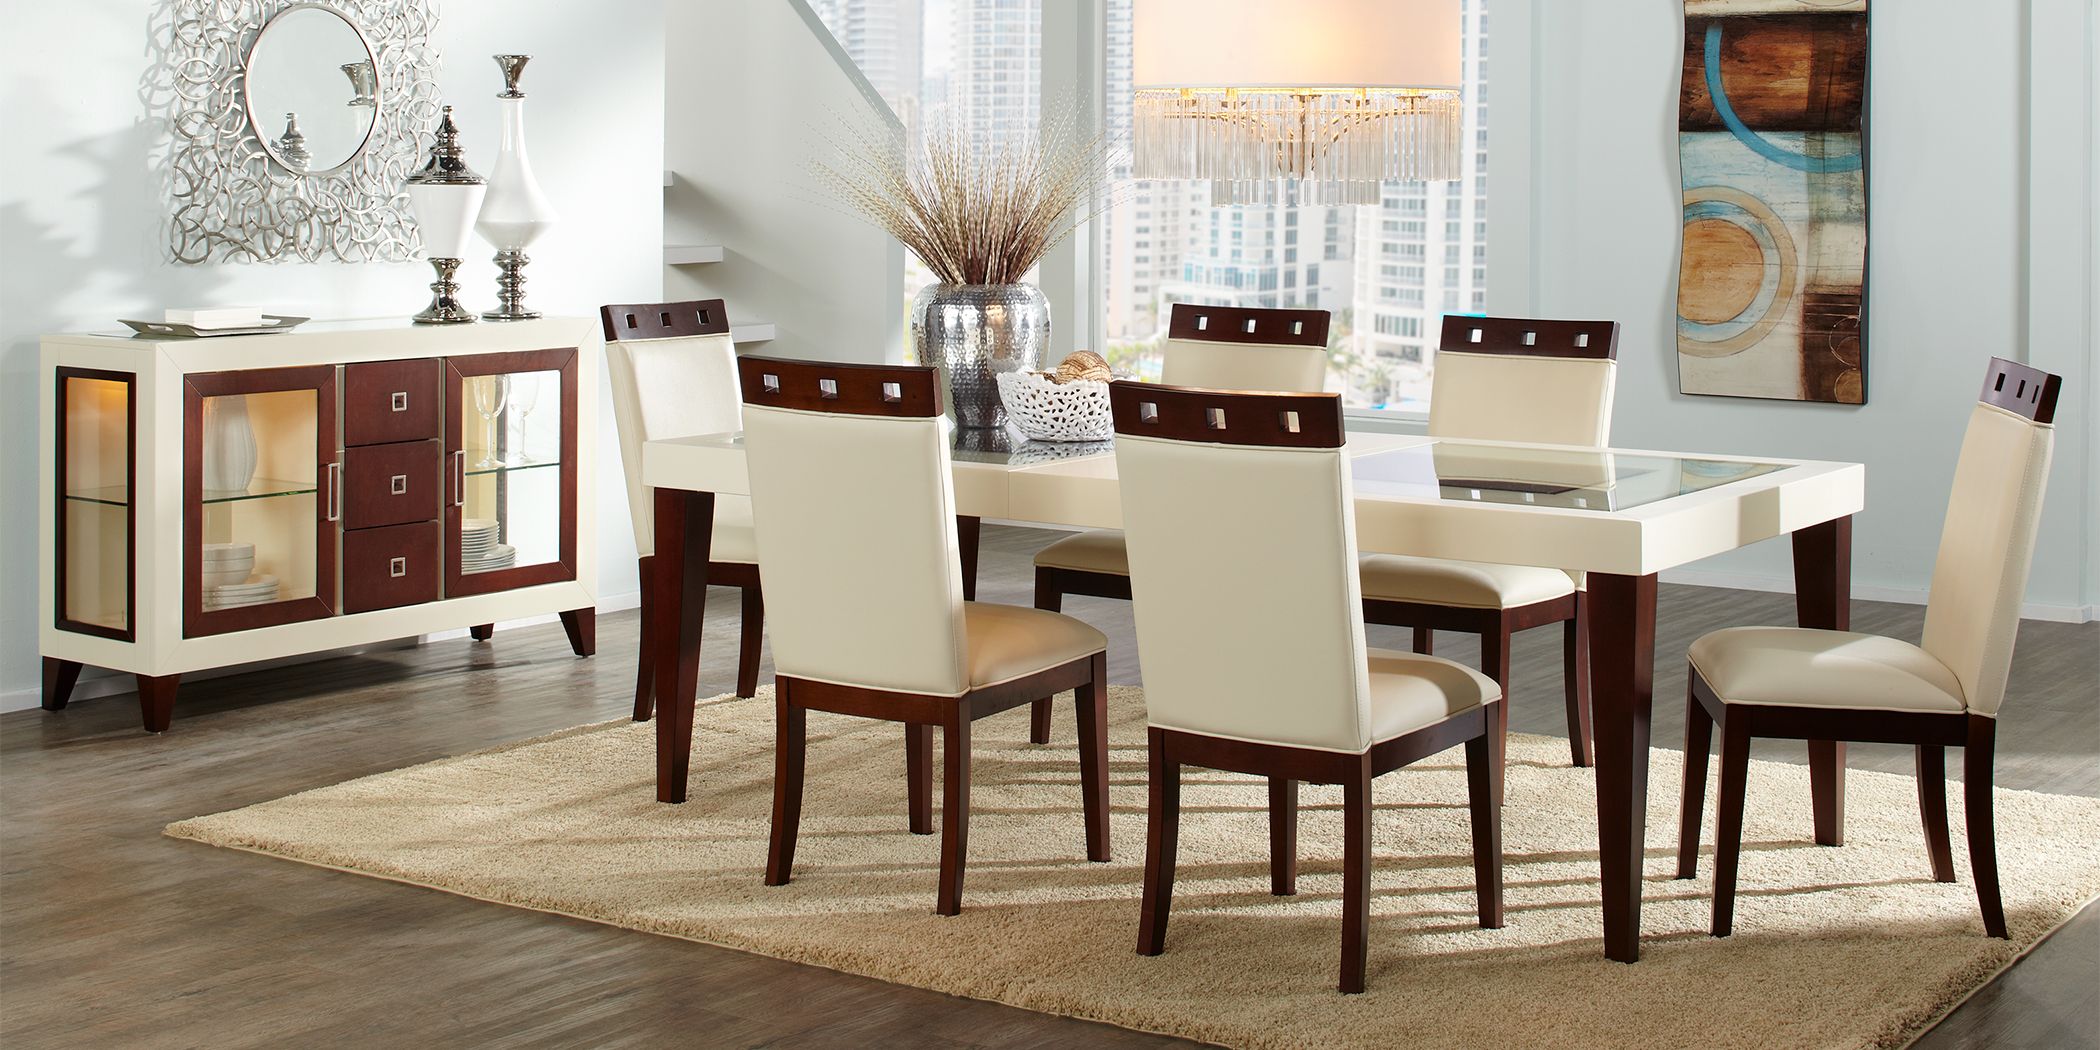 Https Wwwroomstogocom Furniture Product Sofia Vergara Savona Ivory 5 Pc Rectangle Dining Room With Wood Top Chairs 4297202P